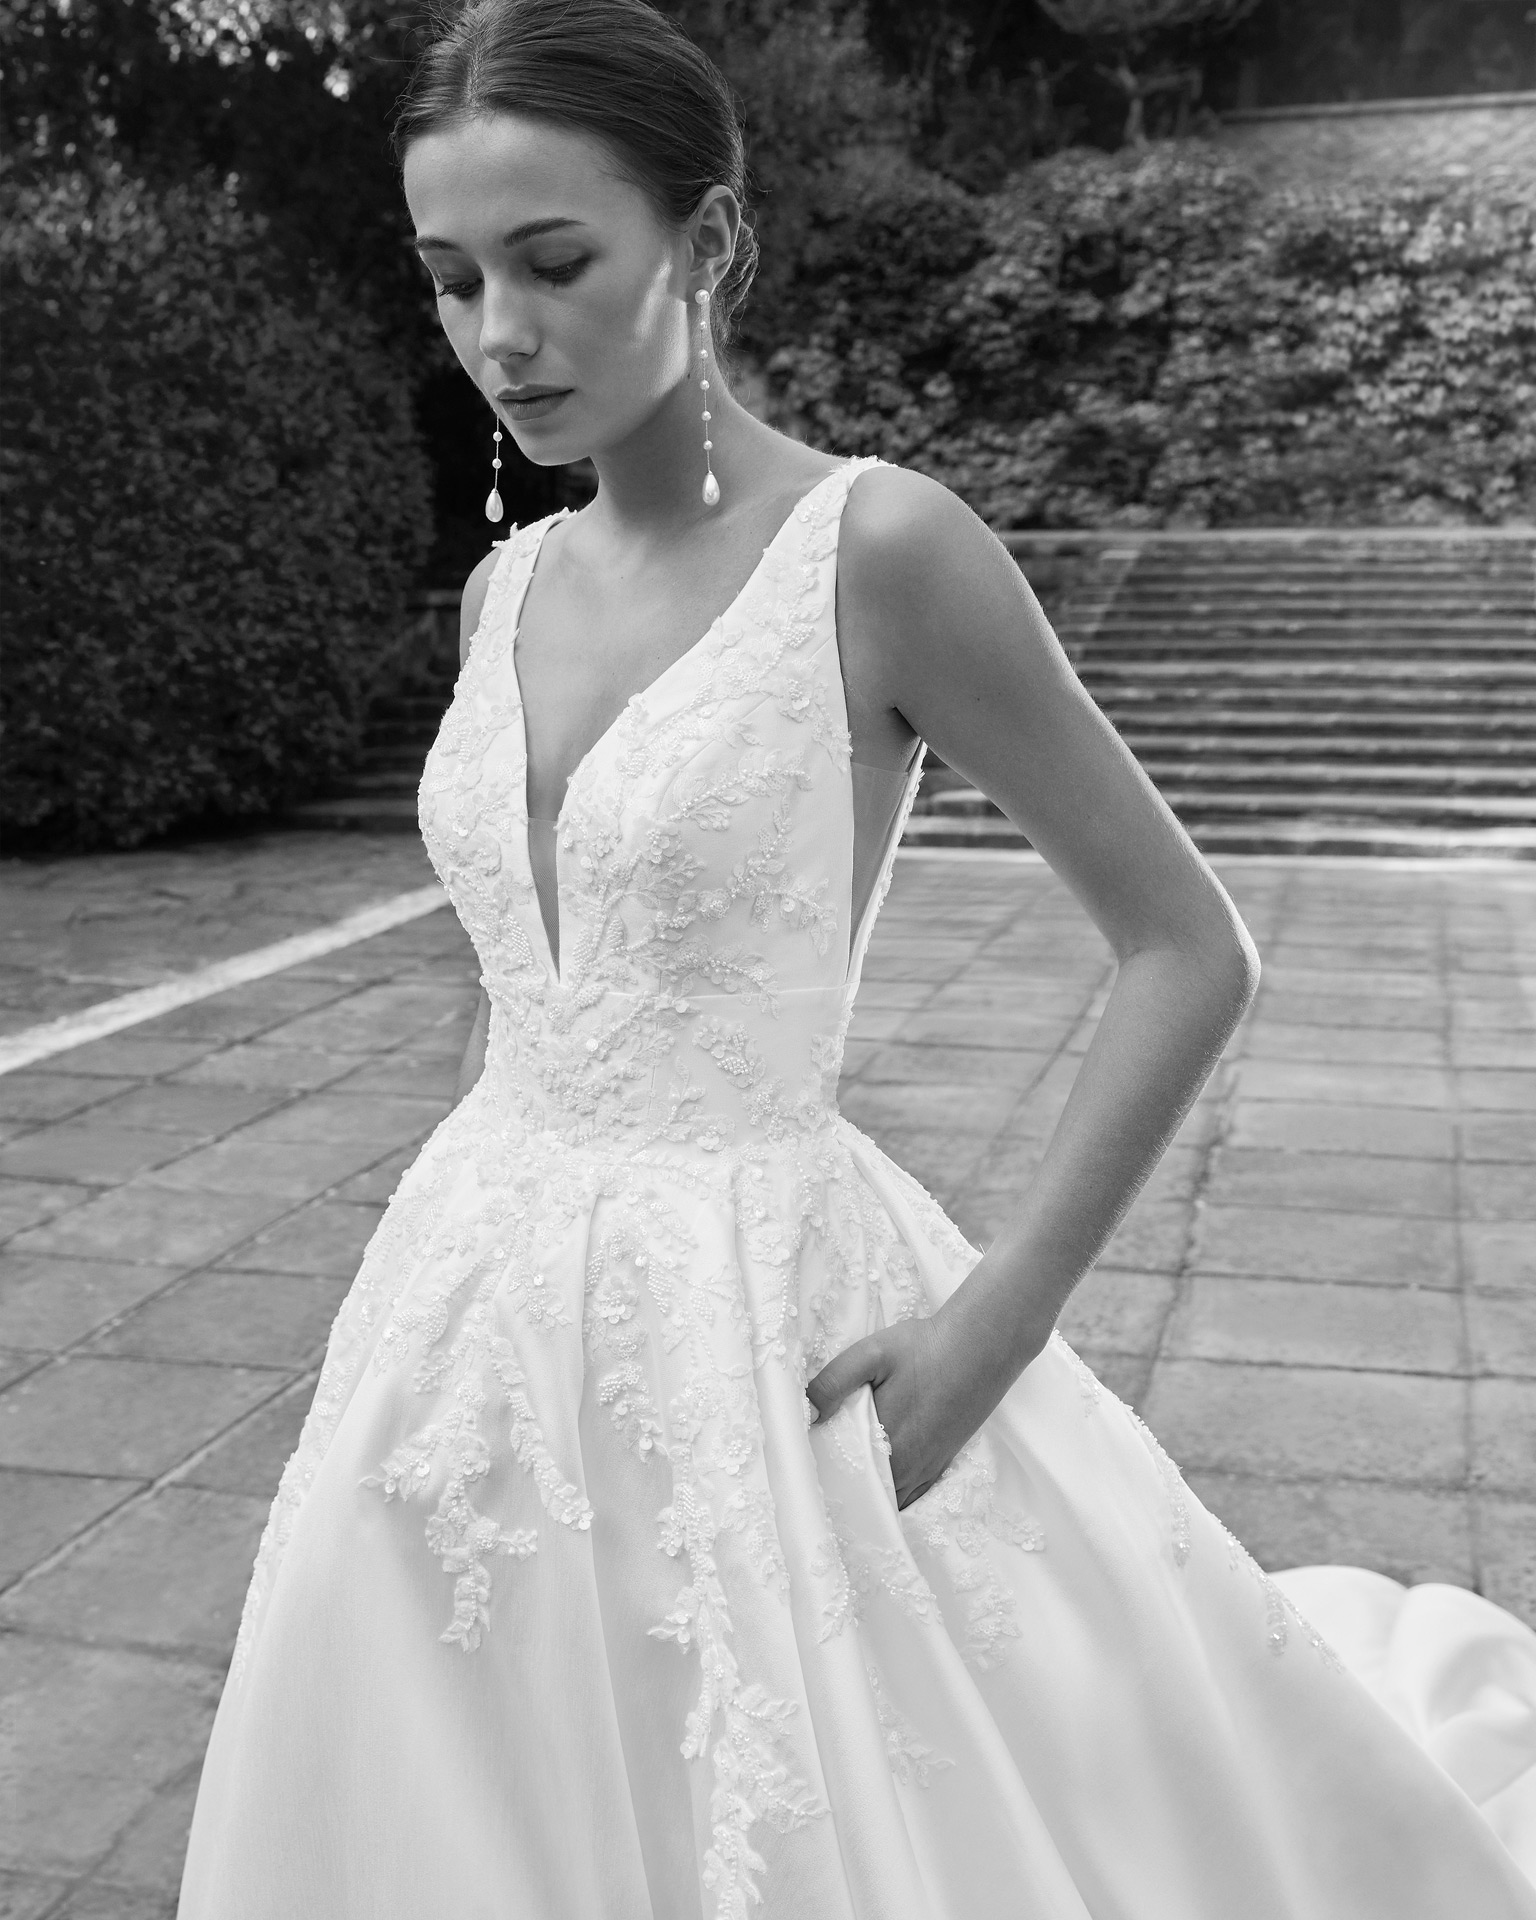 Elegant princess wedding dress, made in mikado embellished with lace and beadwork. This exclusive Luna Studio design features a V-neckline, V-back and skirt with pockets. LUNA_NOVIAS.